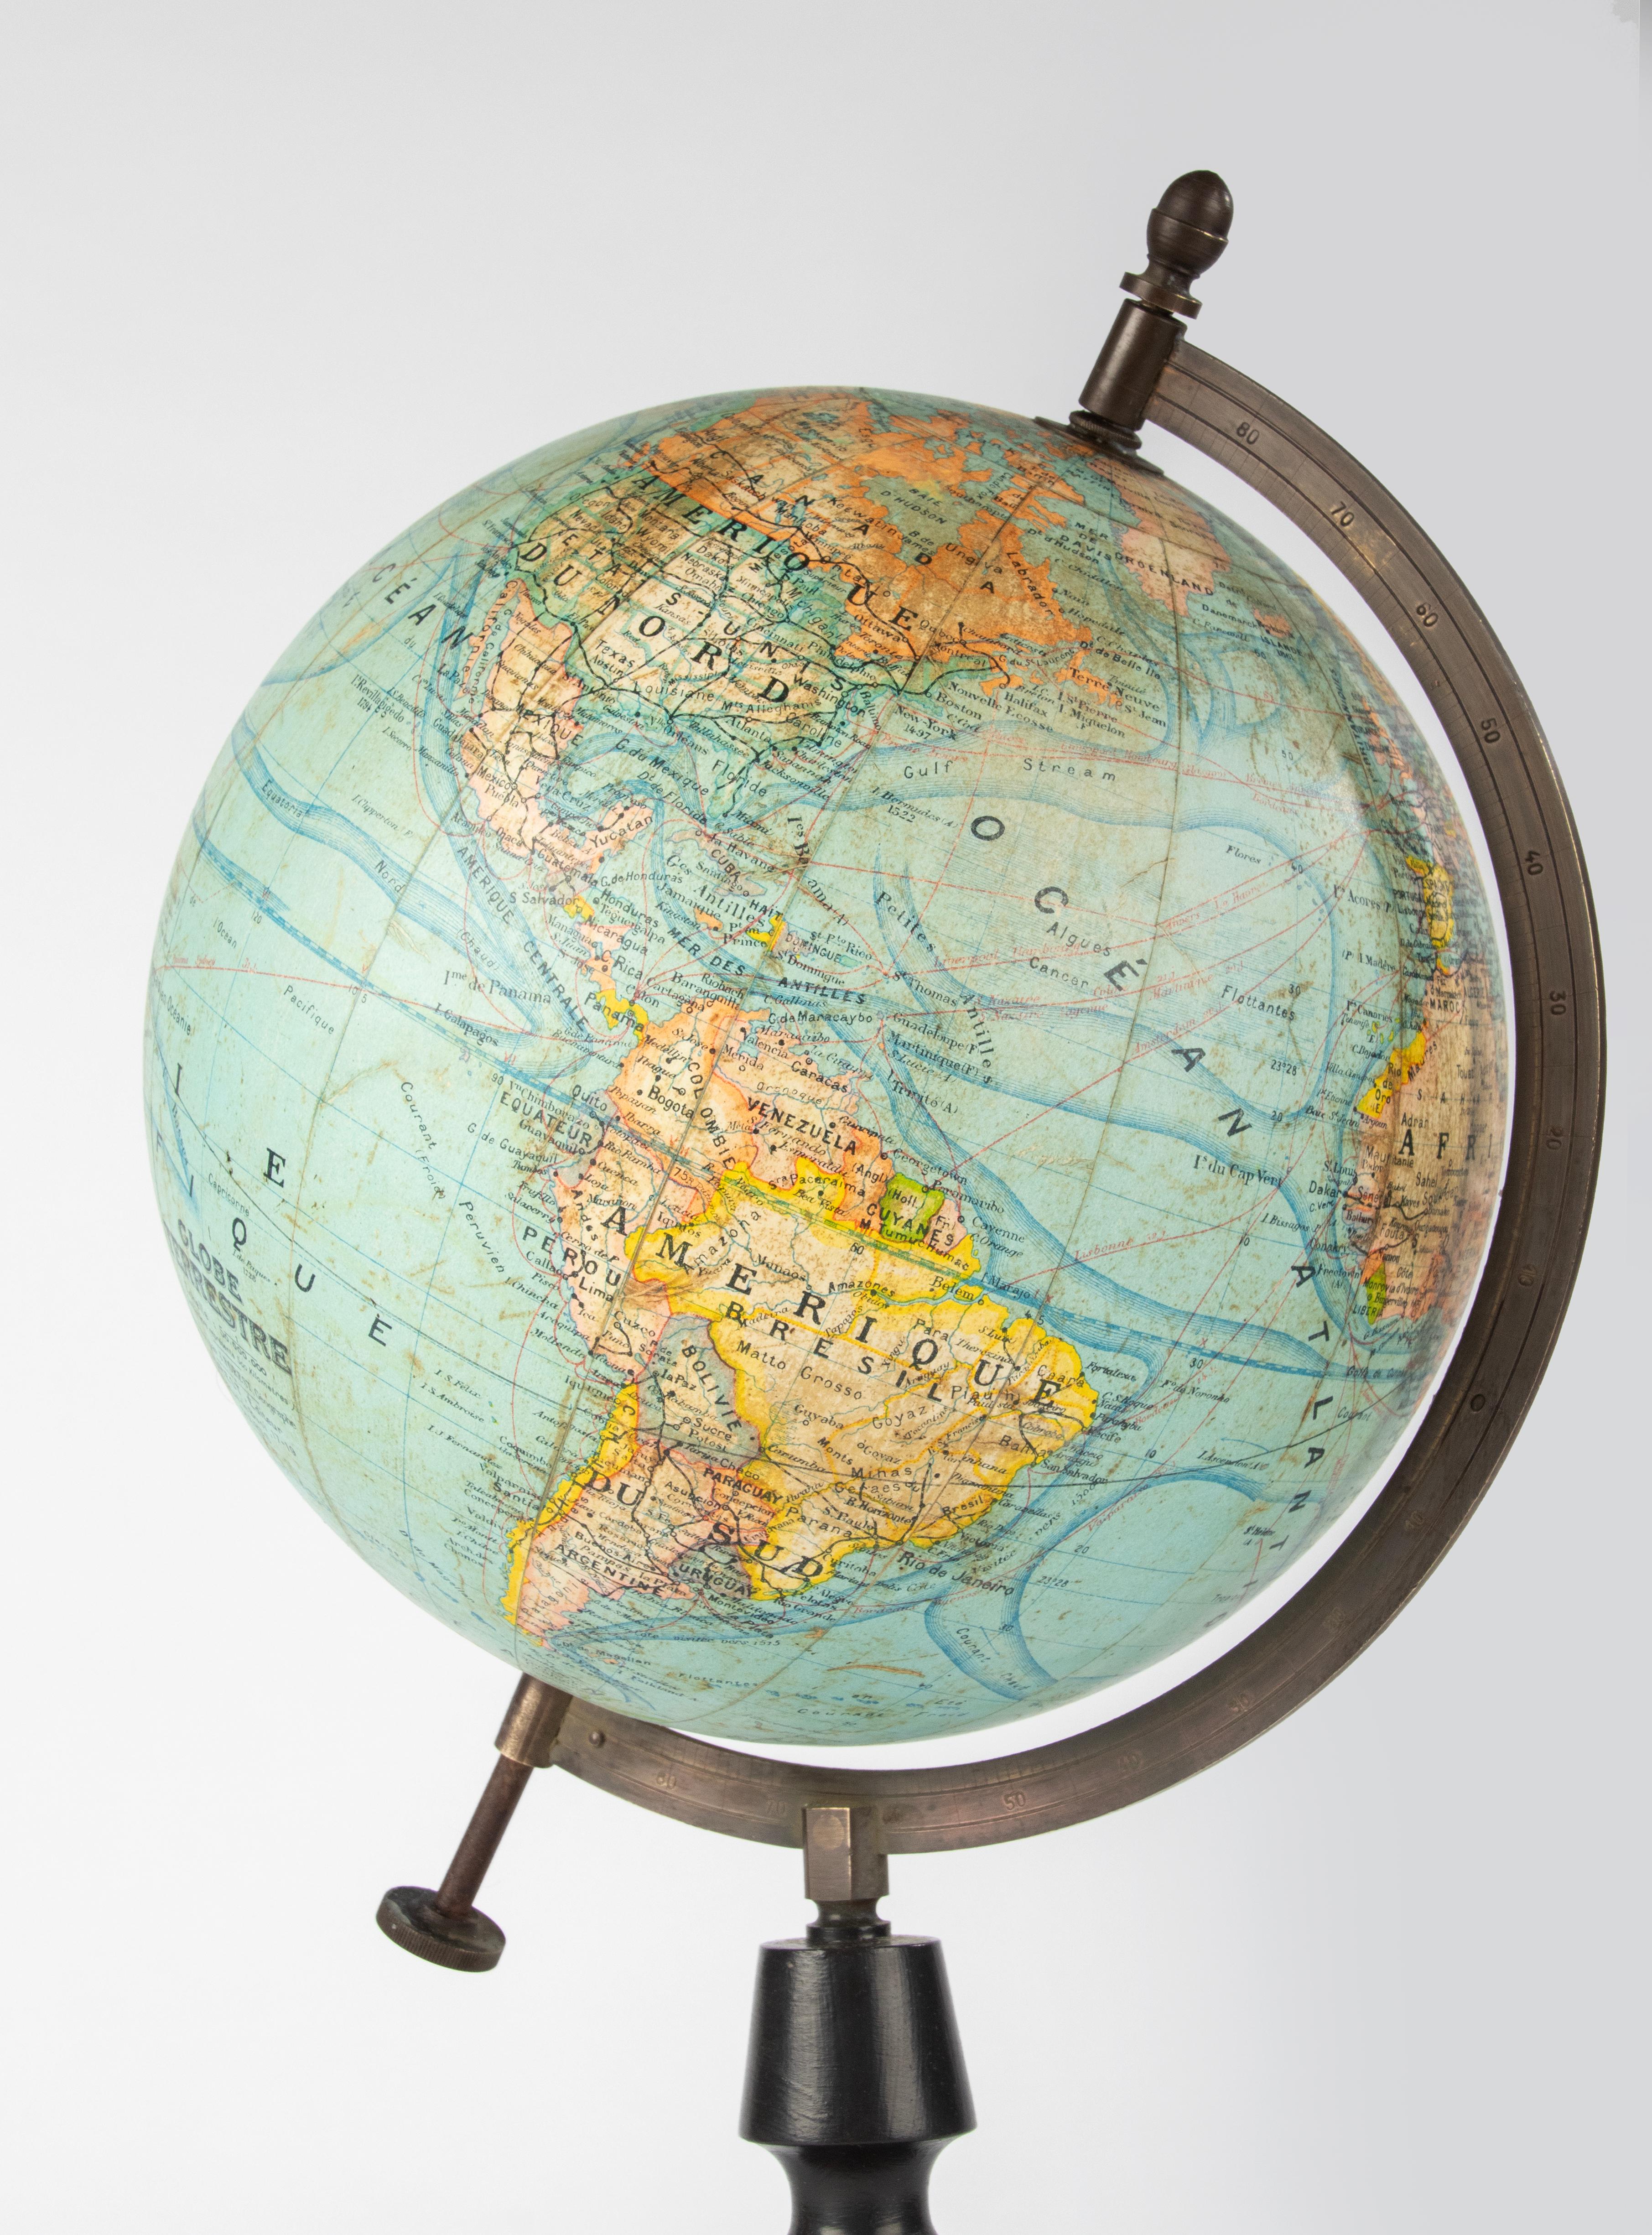 A beautiful antique world globe, made of cardboard and paper, on a blackened wooden stand. 
The globe was edited by J. Forest from Paris. The globe has a beautiful protractor, made of copper. 
Estimated date: circa 1900. 
The globe is in good